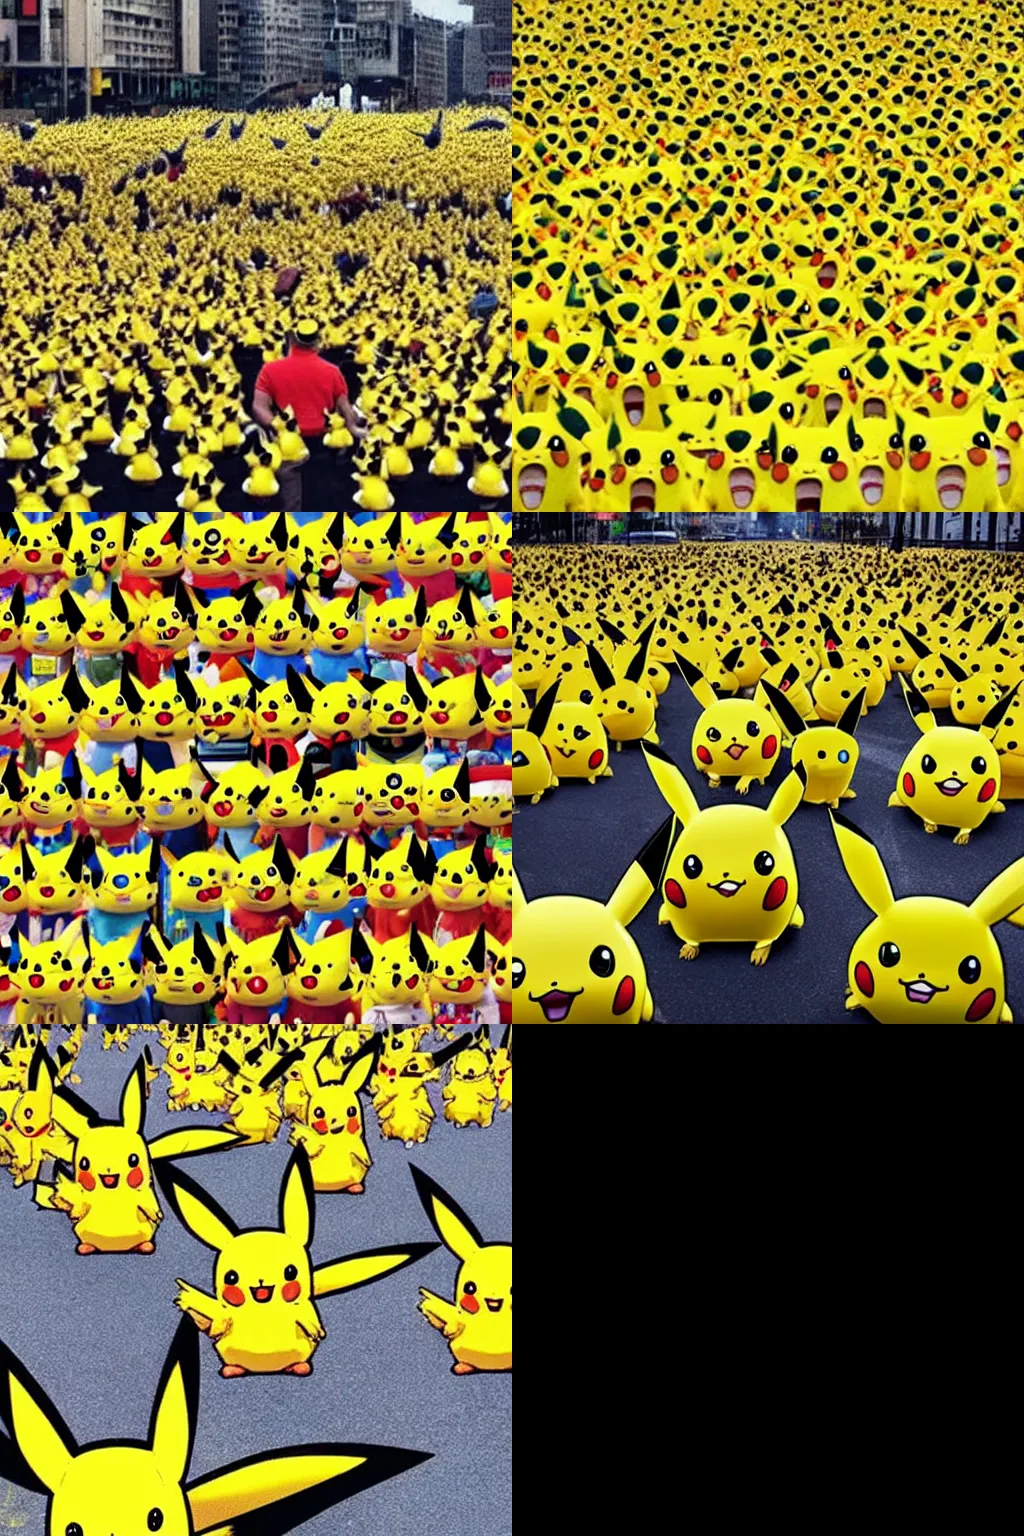 Prompt: 500000000 pikachu's take over the world